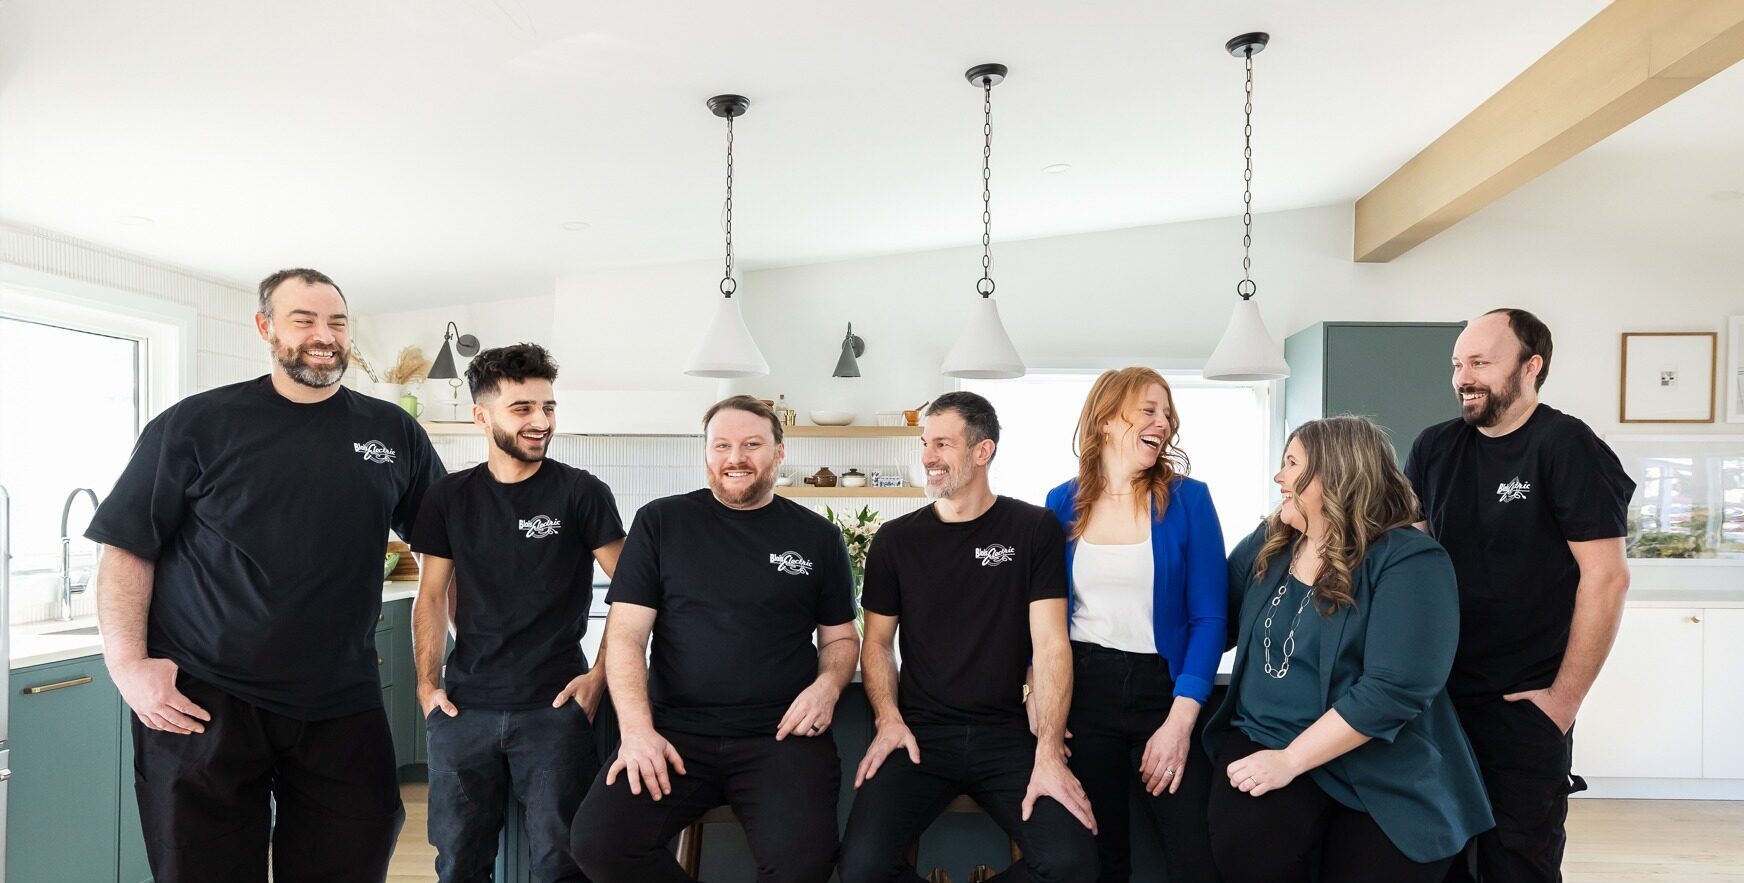 Eight people, wearing matching black T-shirts with a logo, are smiling and posing together in a bright, modern kitchen with pendant lights.